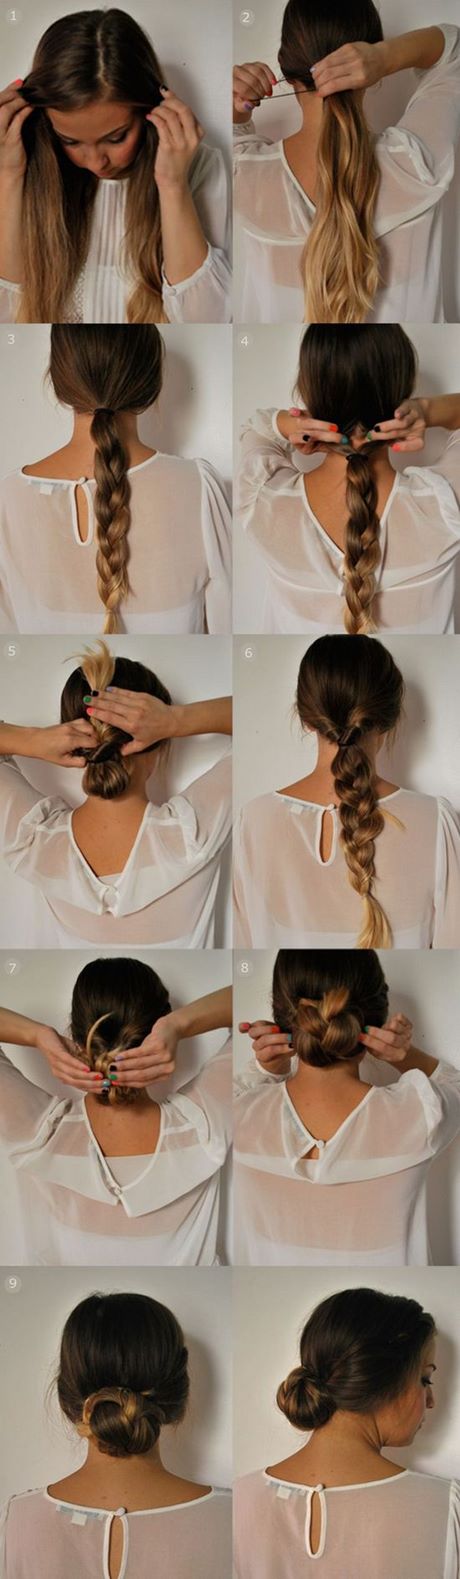 new-easy-hairstyles-for-medium-hair-04_7 New easy hairstyles for medium hair